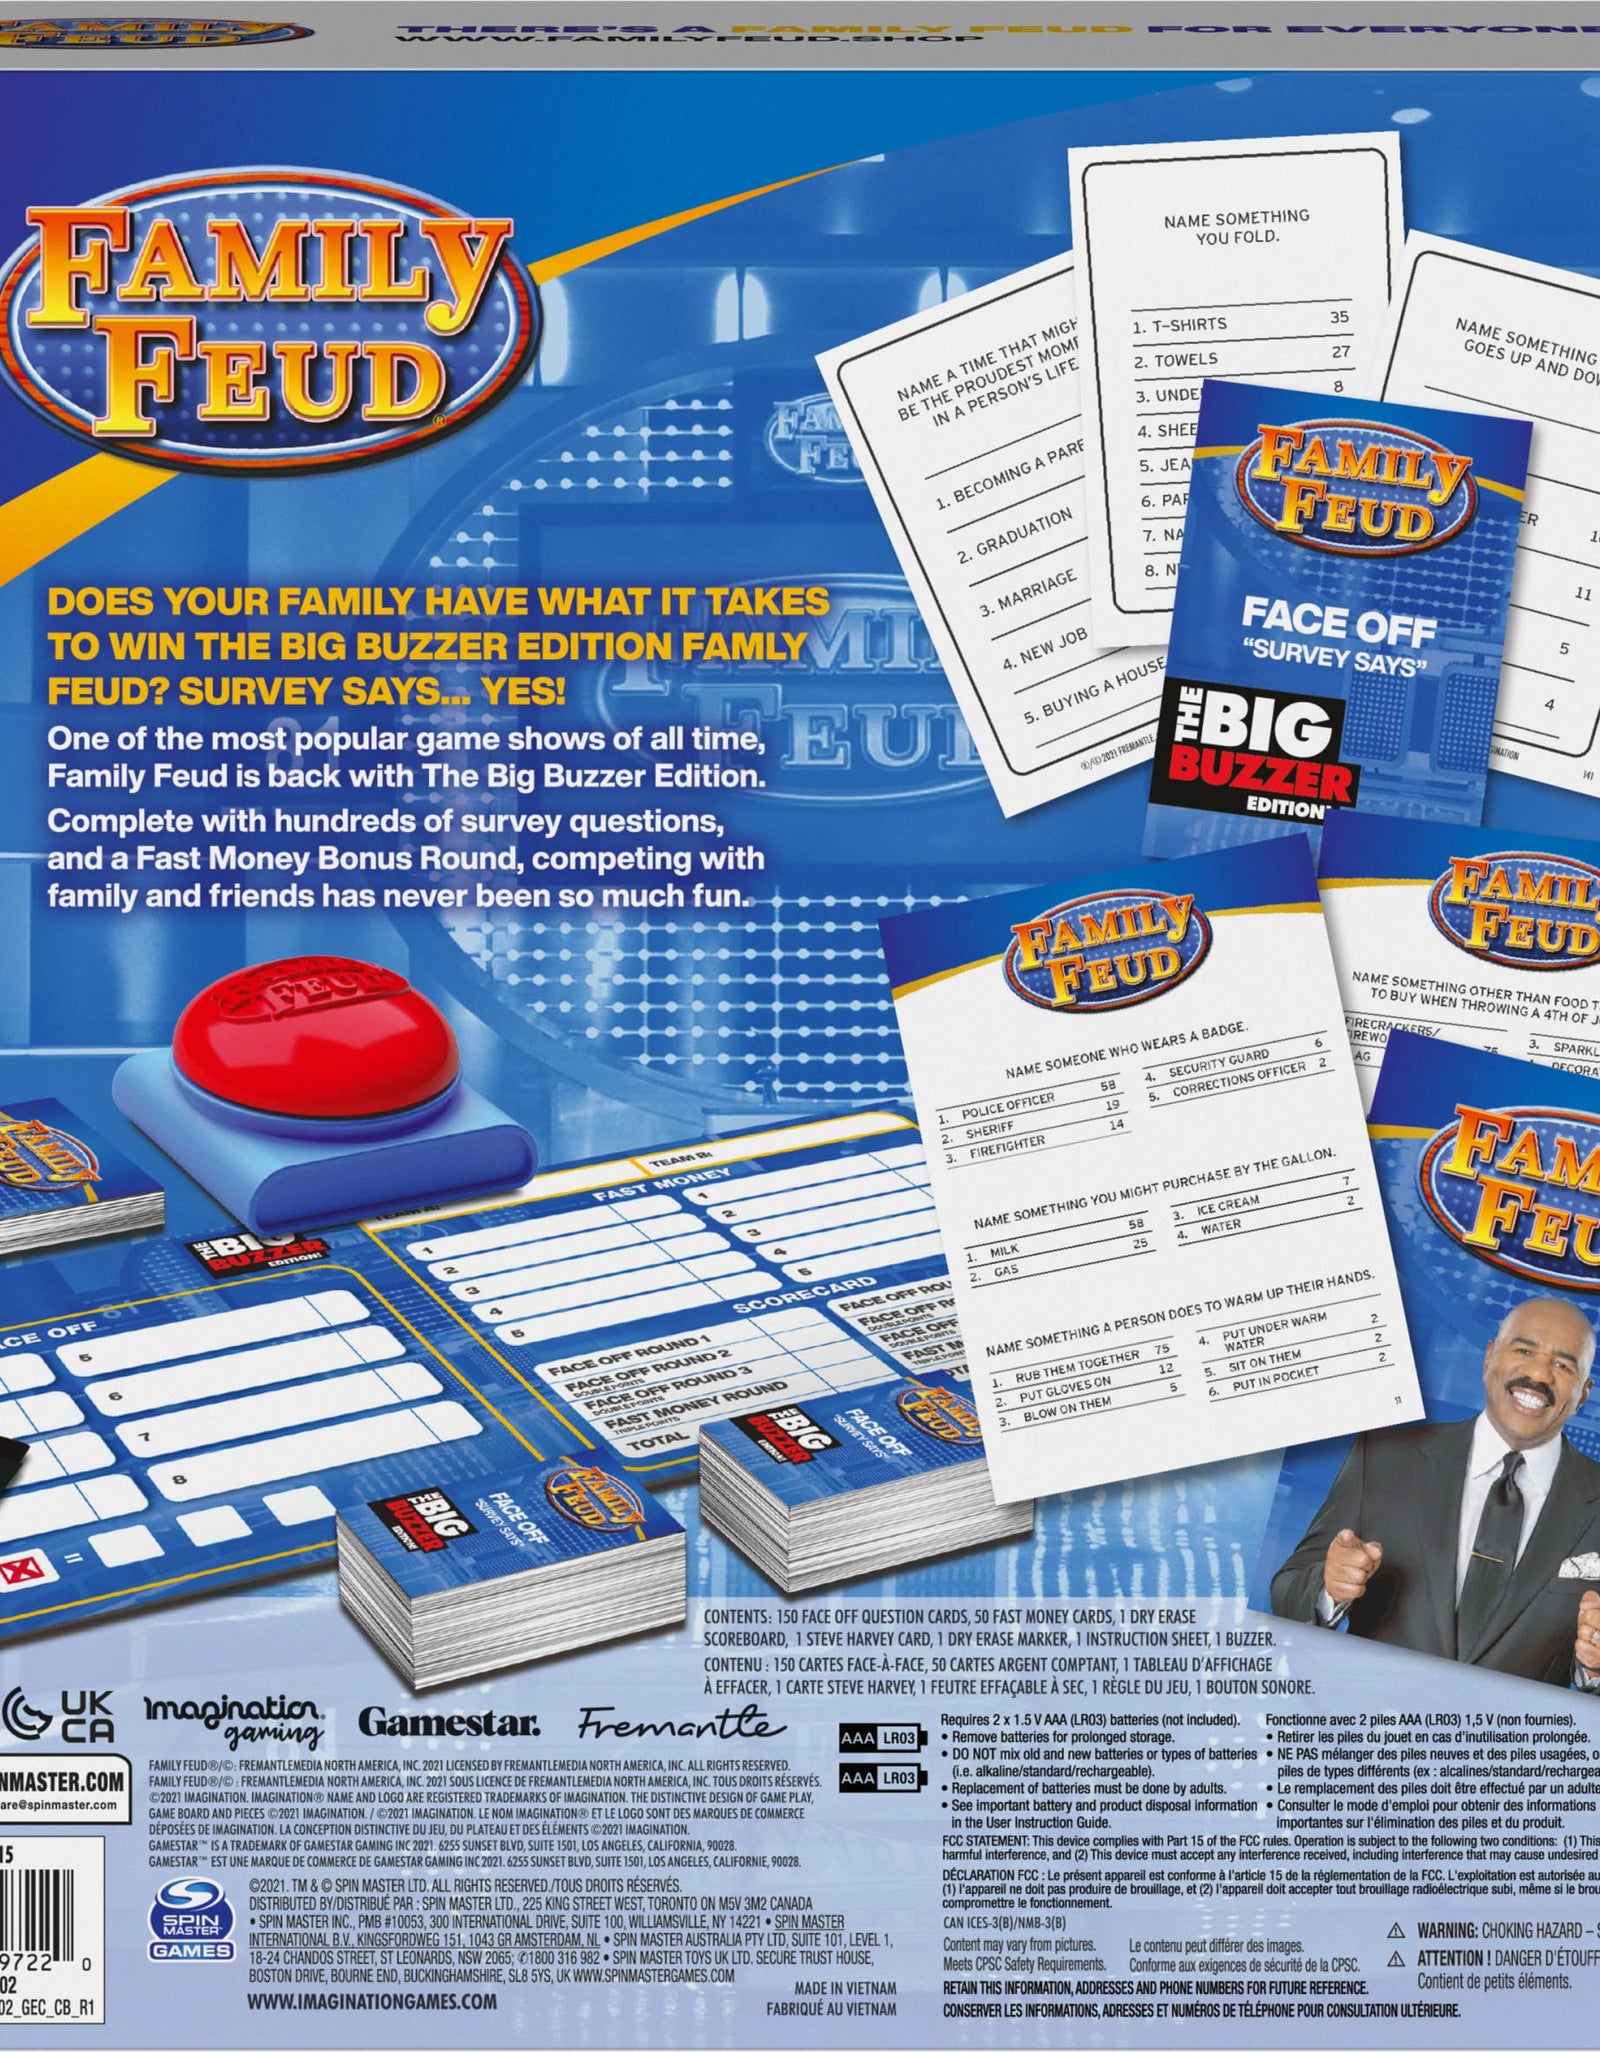 Family Feud Big Buzzer Game, Amazon Exclusive “Buzz in” with The Electronic Buzzer Board Game for Hilarious Family Fun, Ages 8 and up